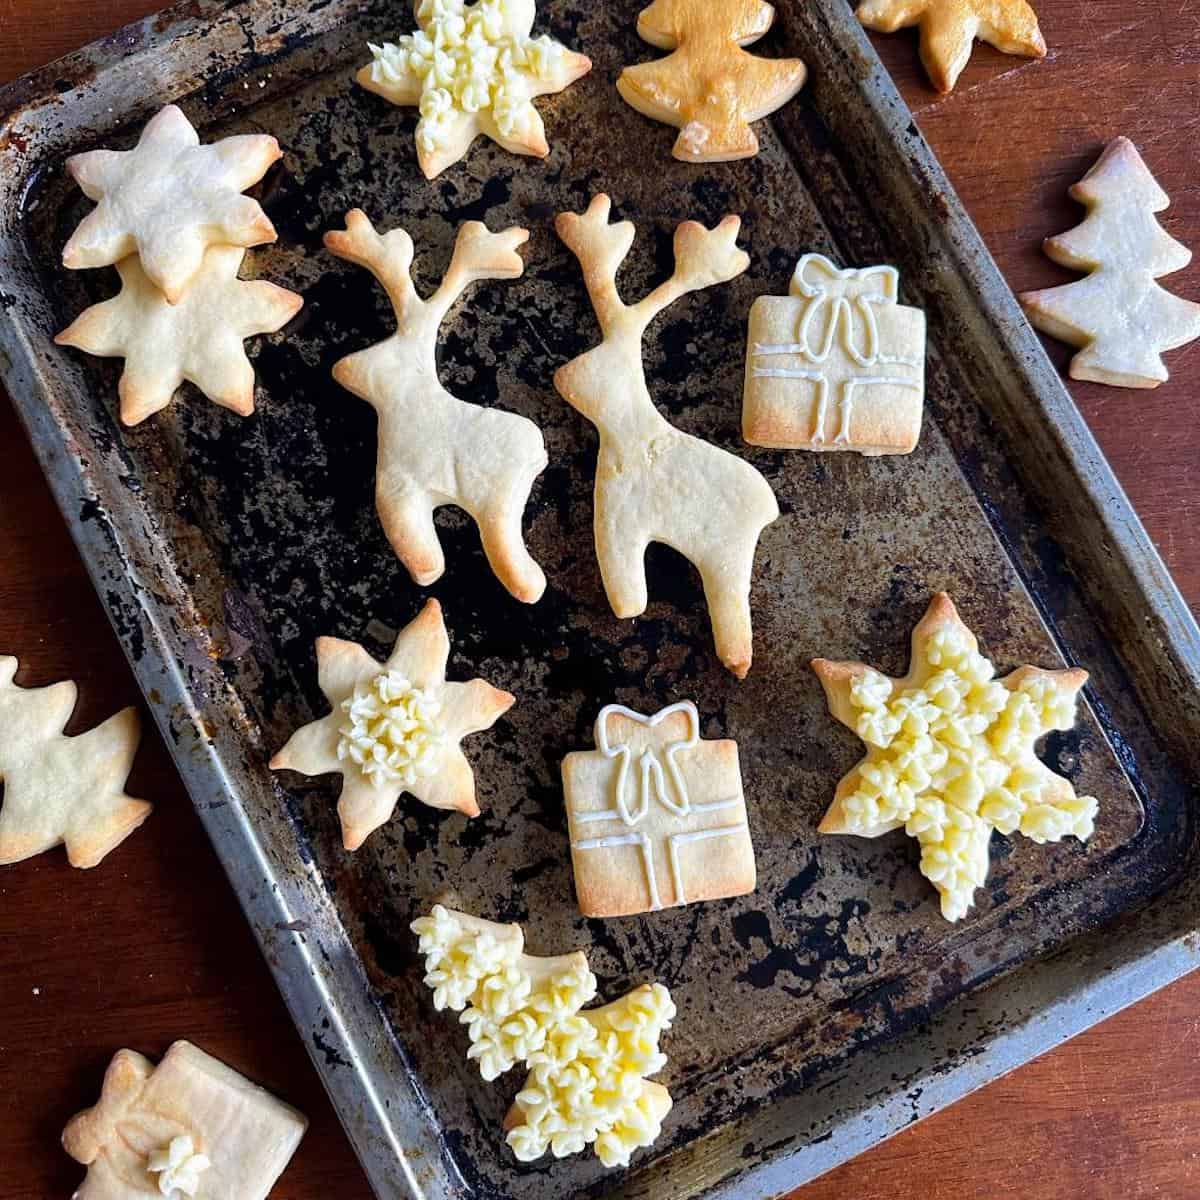 Decorated Christmas cookies on a baking tray.